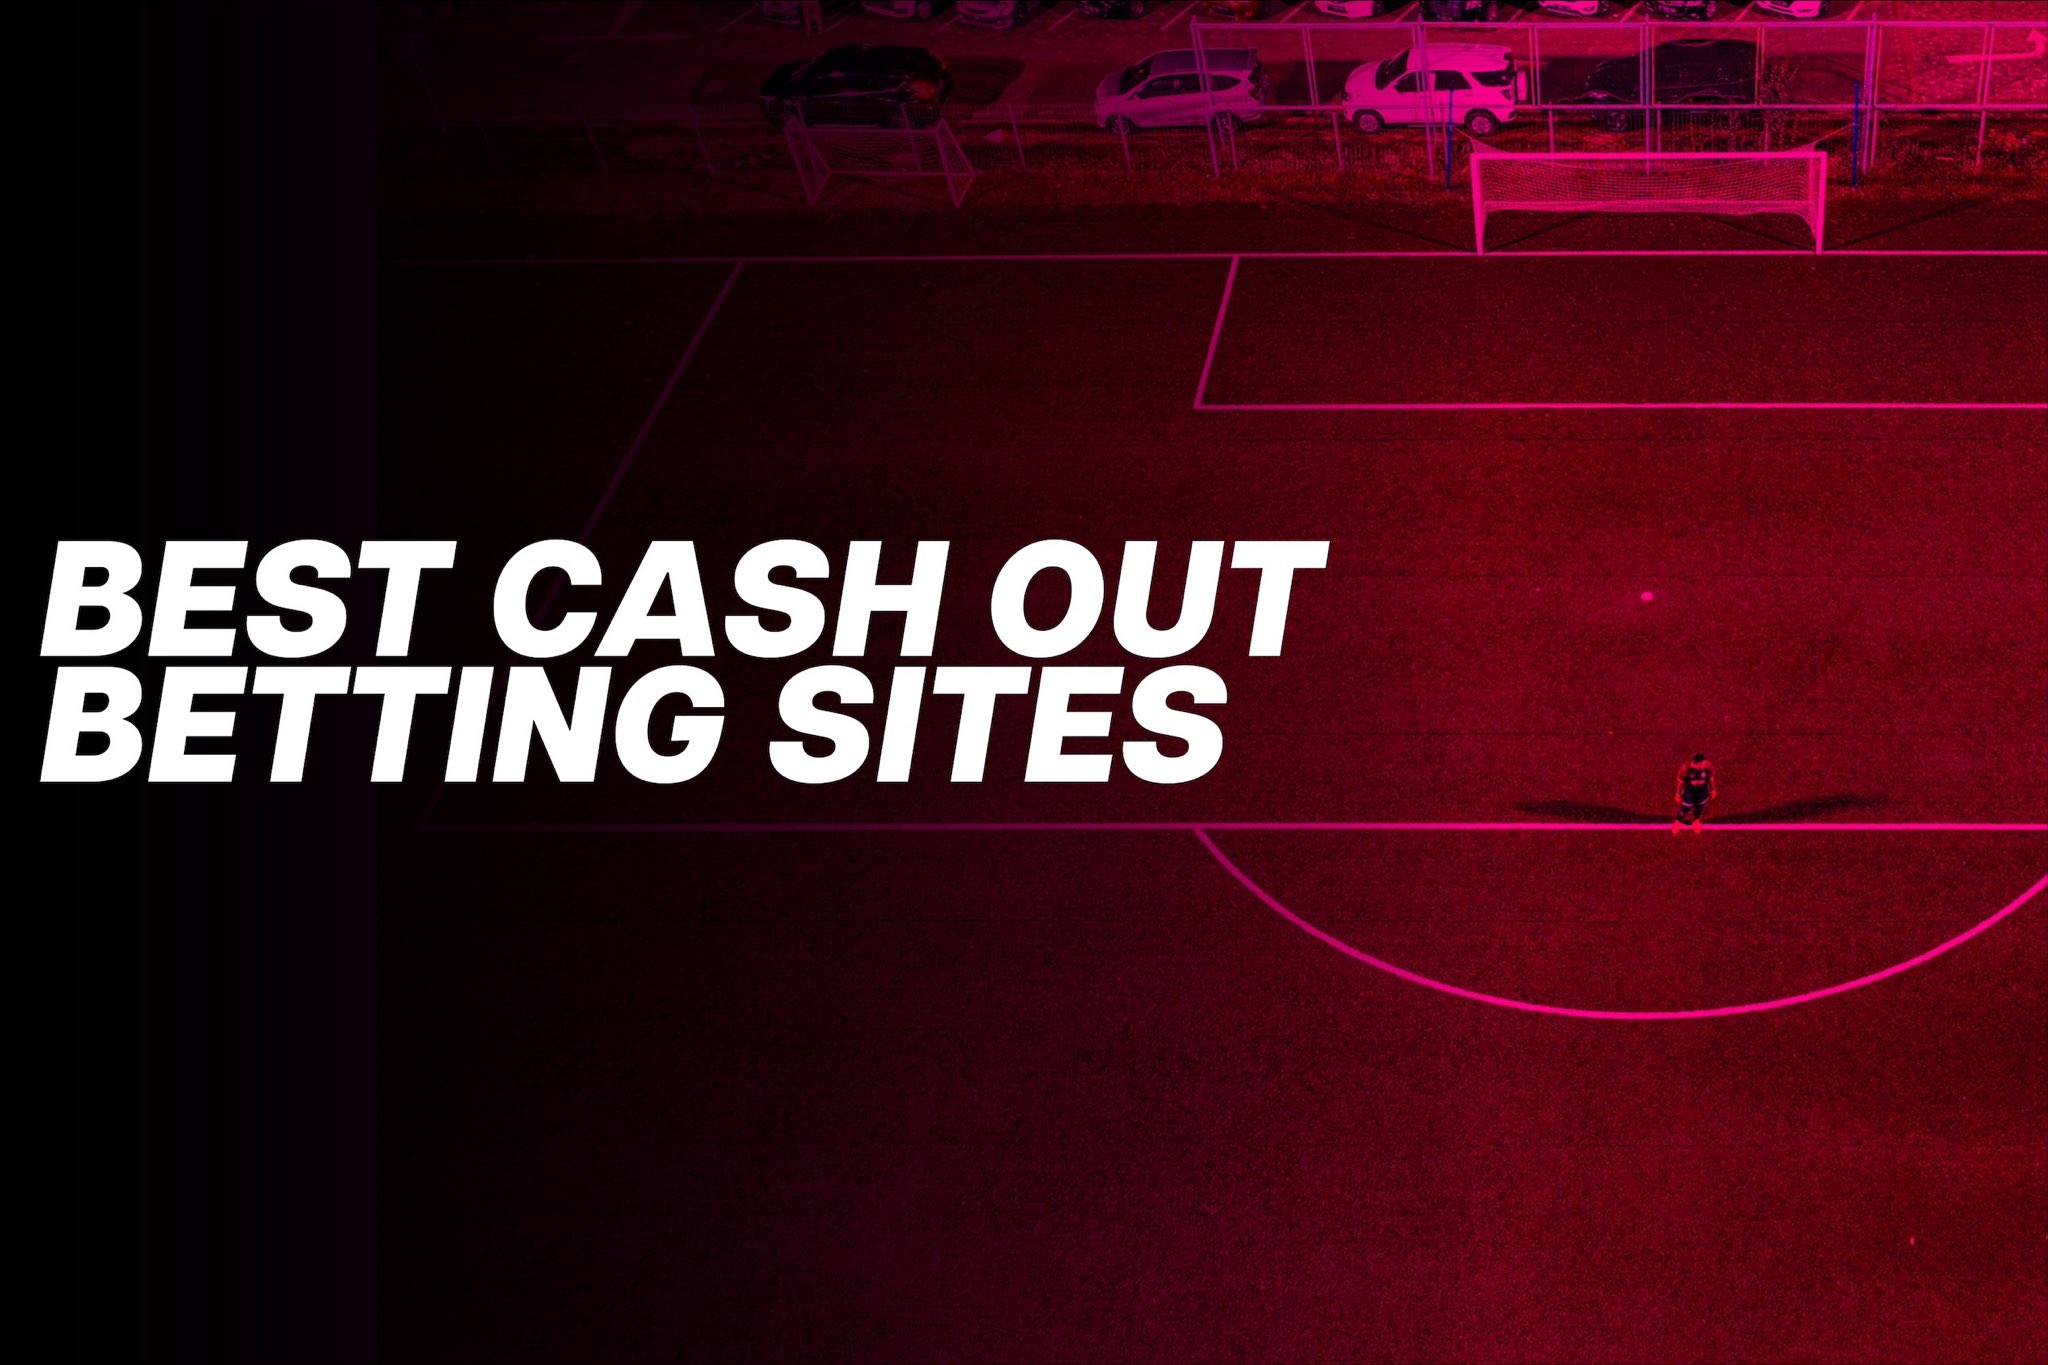 Best cash out betting sites image